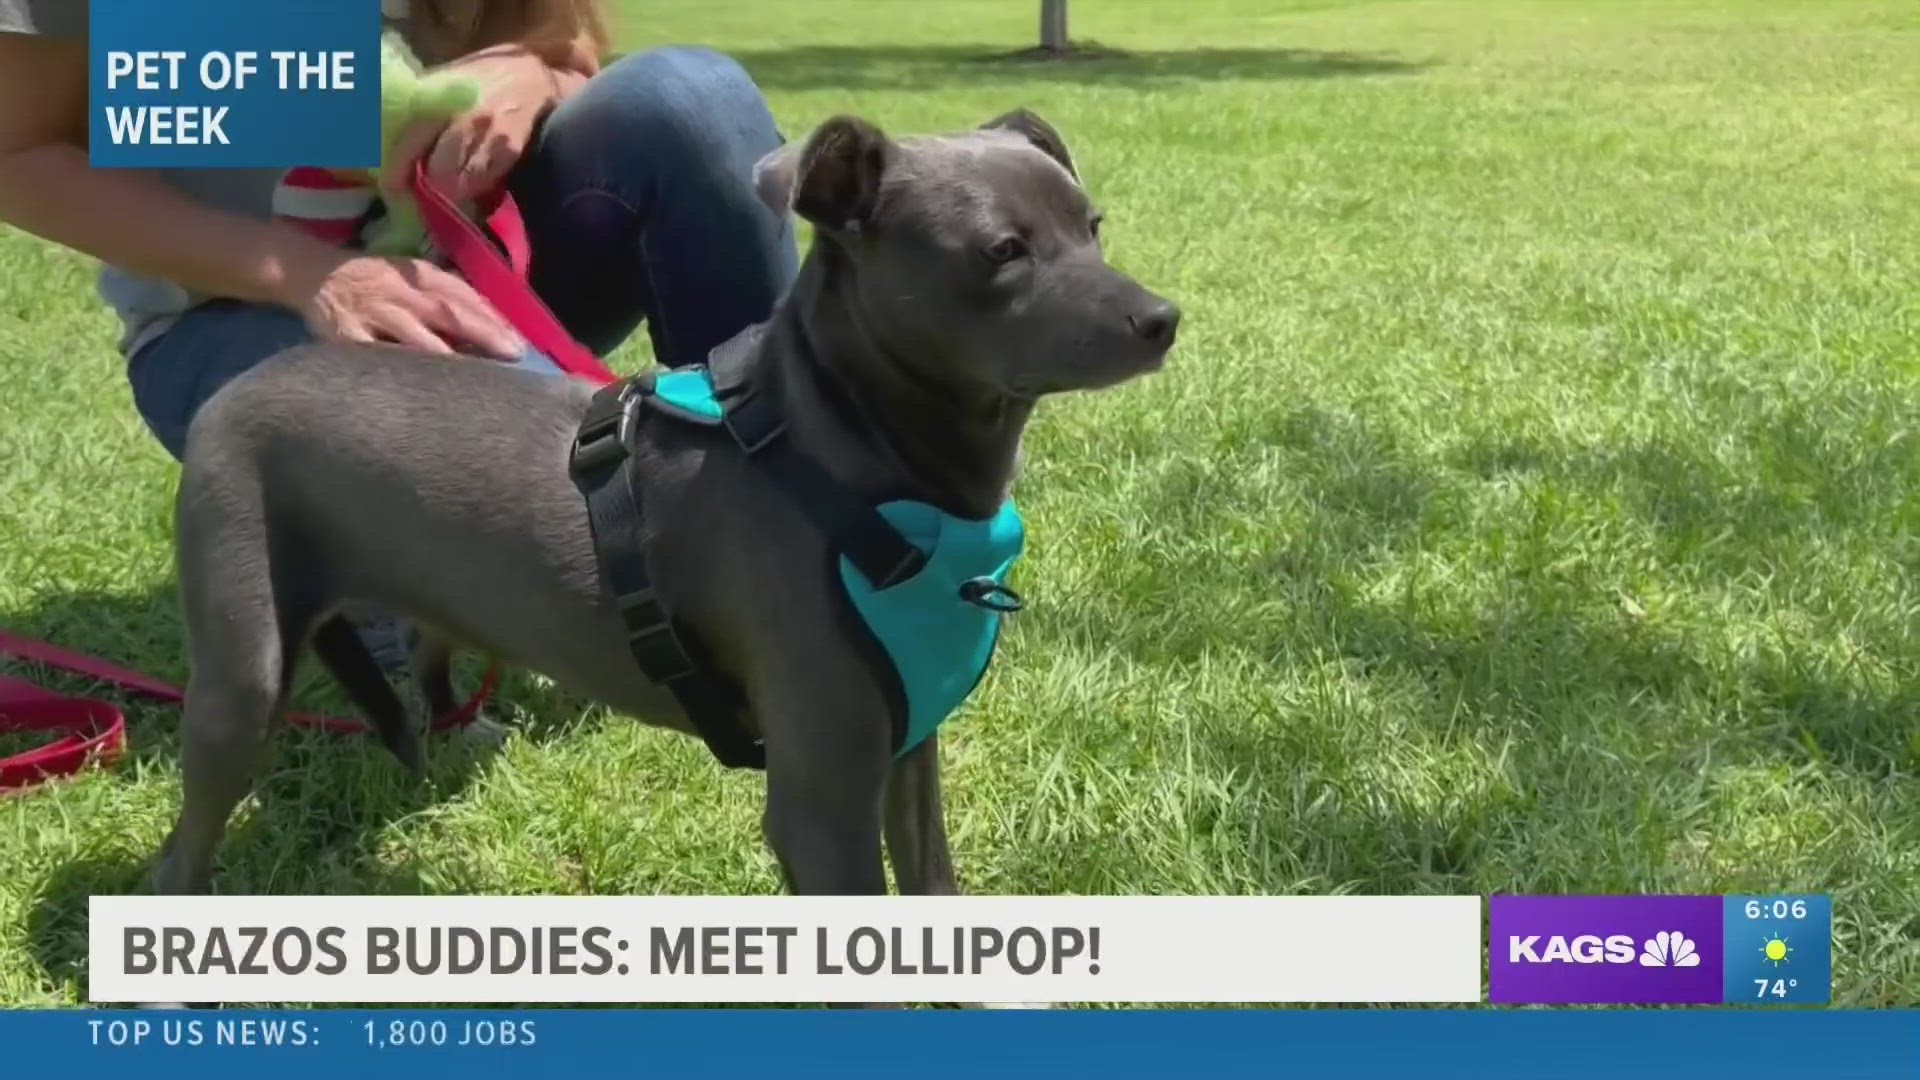 This week's featured Brazos Buddy is Lollipop, a Pit-Terrier mix that's looking to be adopted.